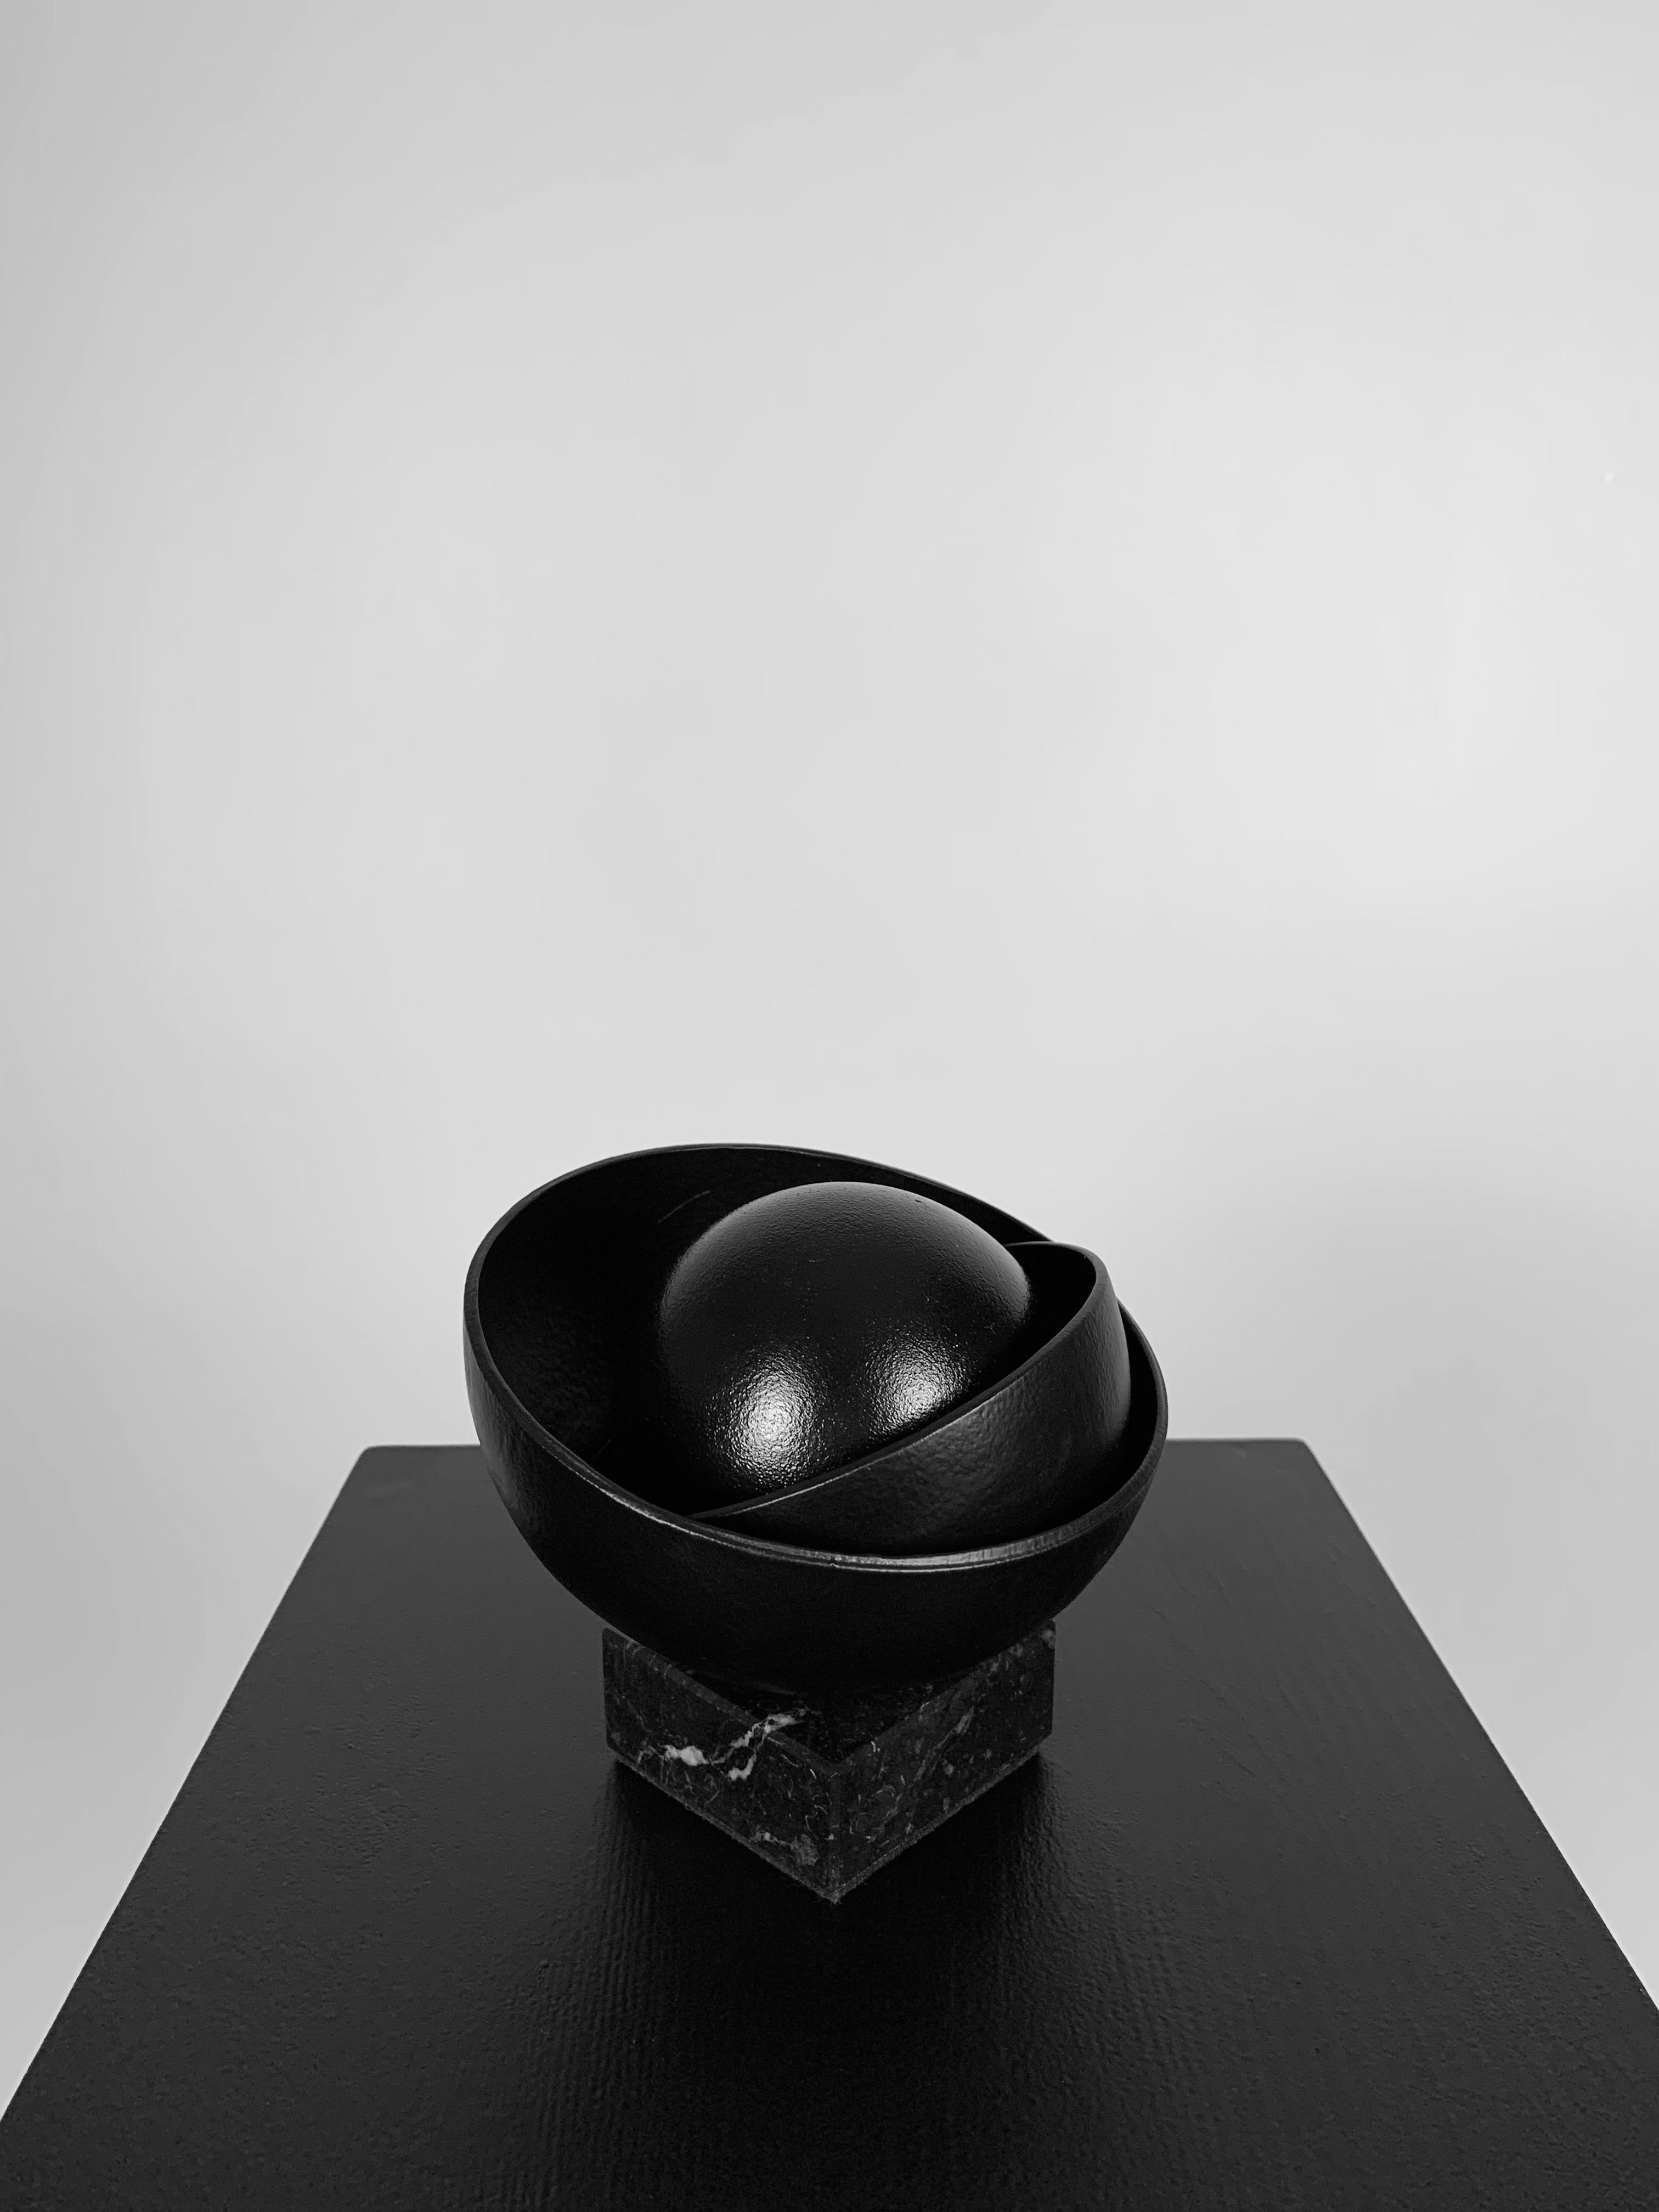 Black Shell with Big Black Pearl - Abstract Sculpture by IRENA TONE